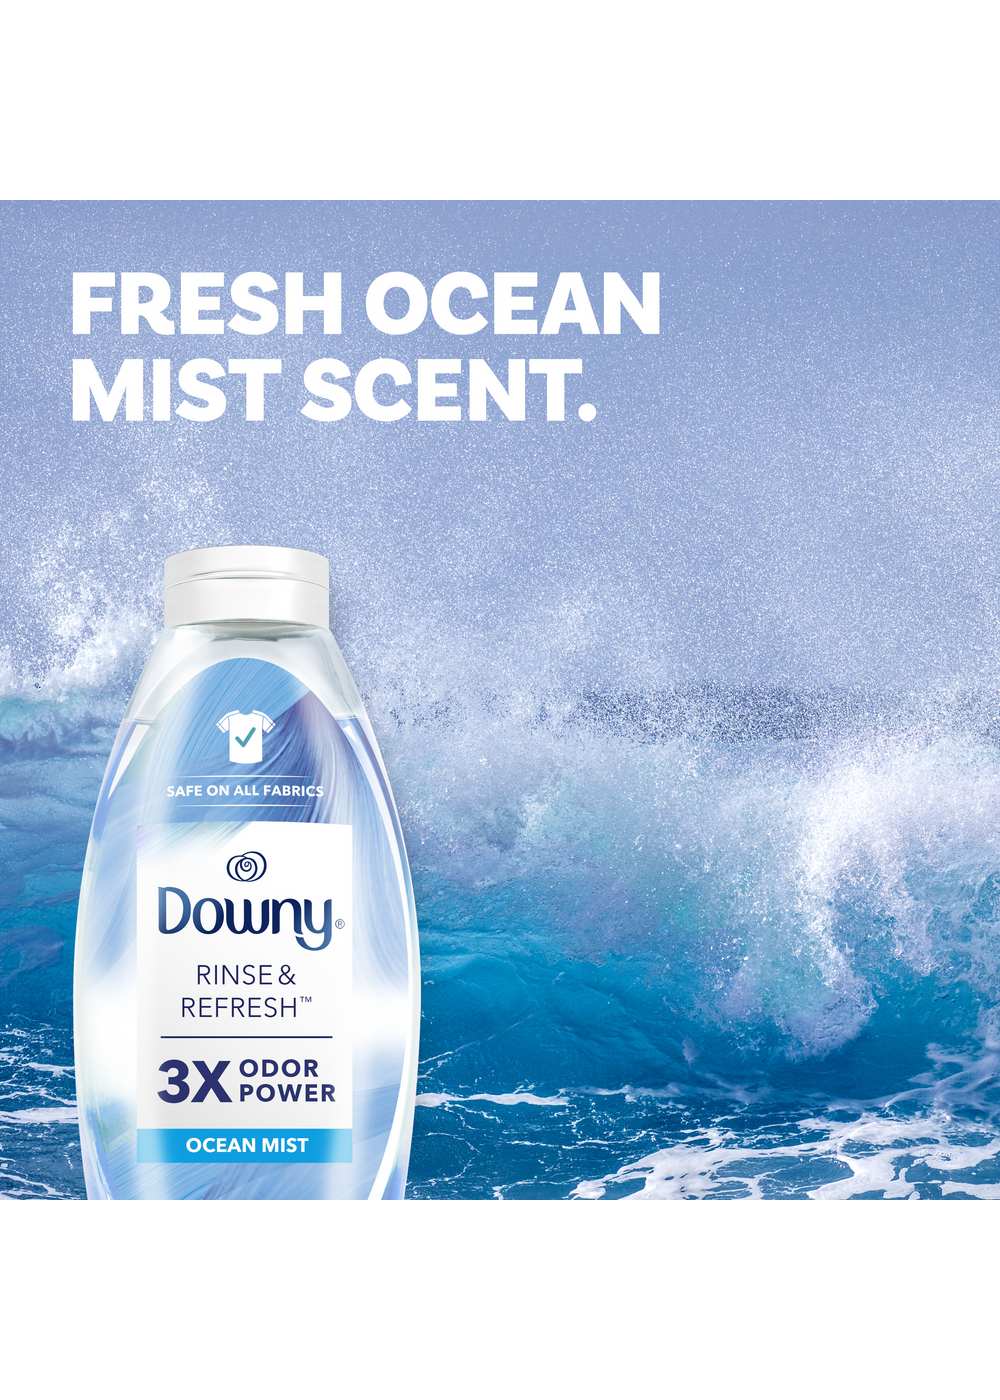 Downy Rinse & Refresh Laundry Odor Remover, 37 Loads - Ocean Mist; image 5 of 10